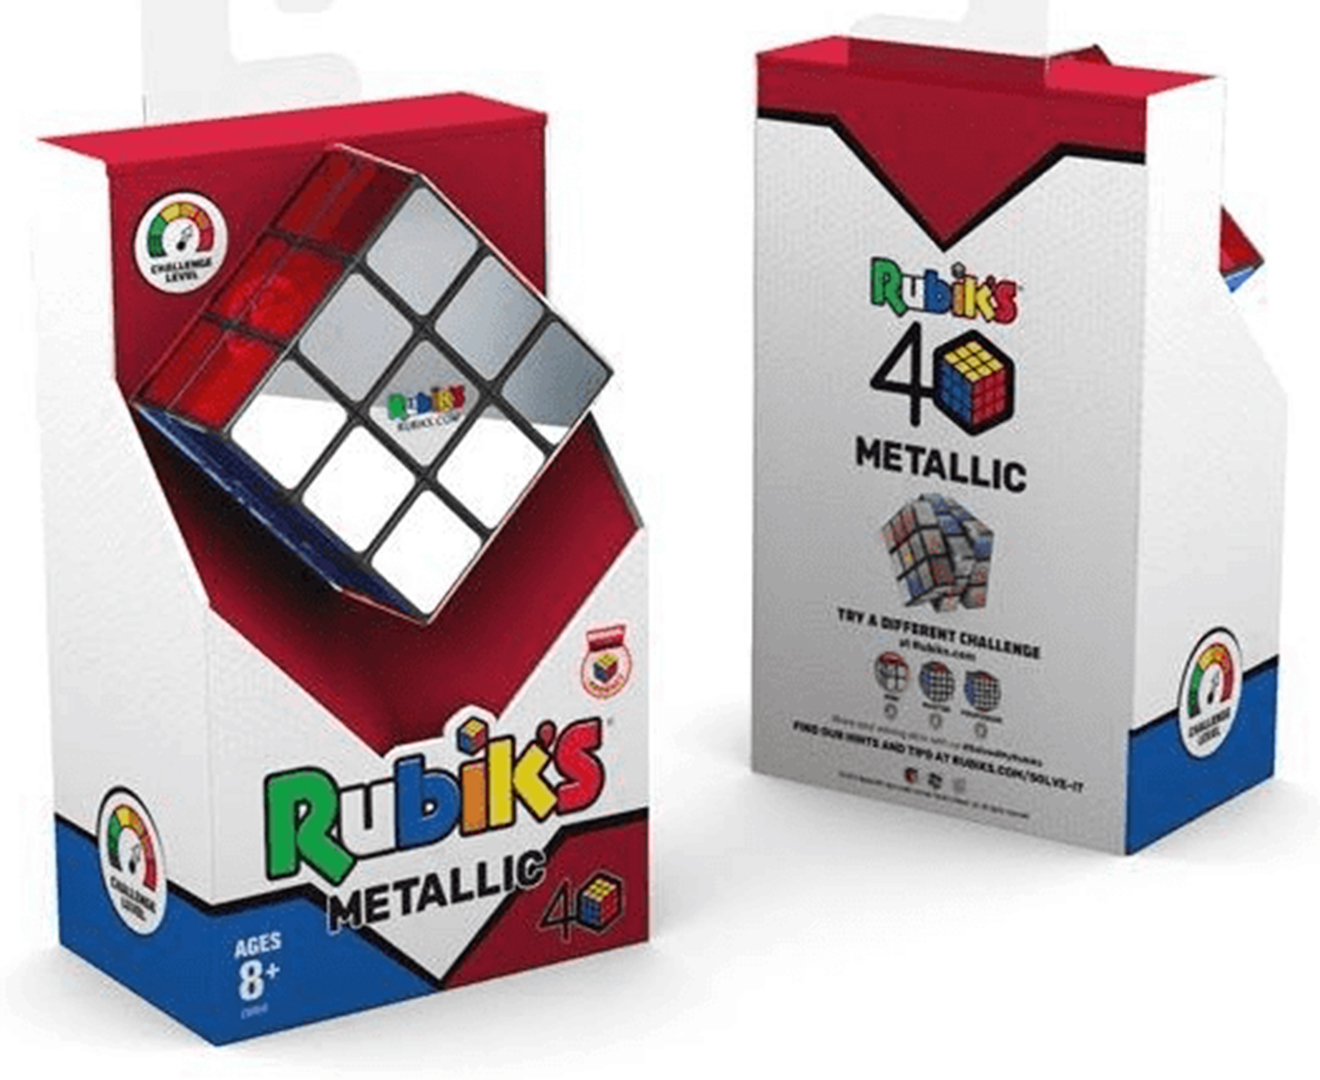 3x3 Cube with a Twist Classic Problem-Solving Puzzle Toy Rubiks Metallic 40th Anniversary Cube 